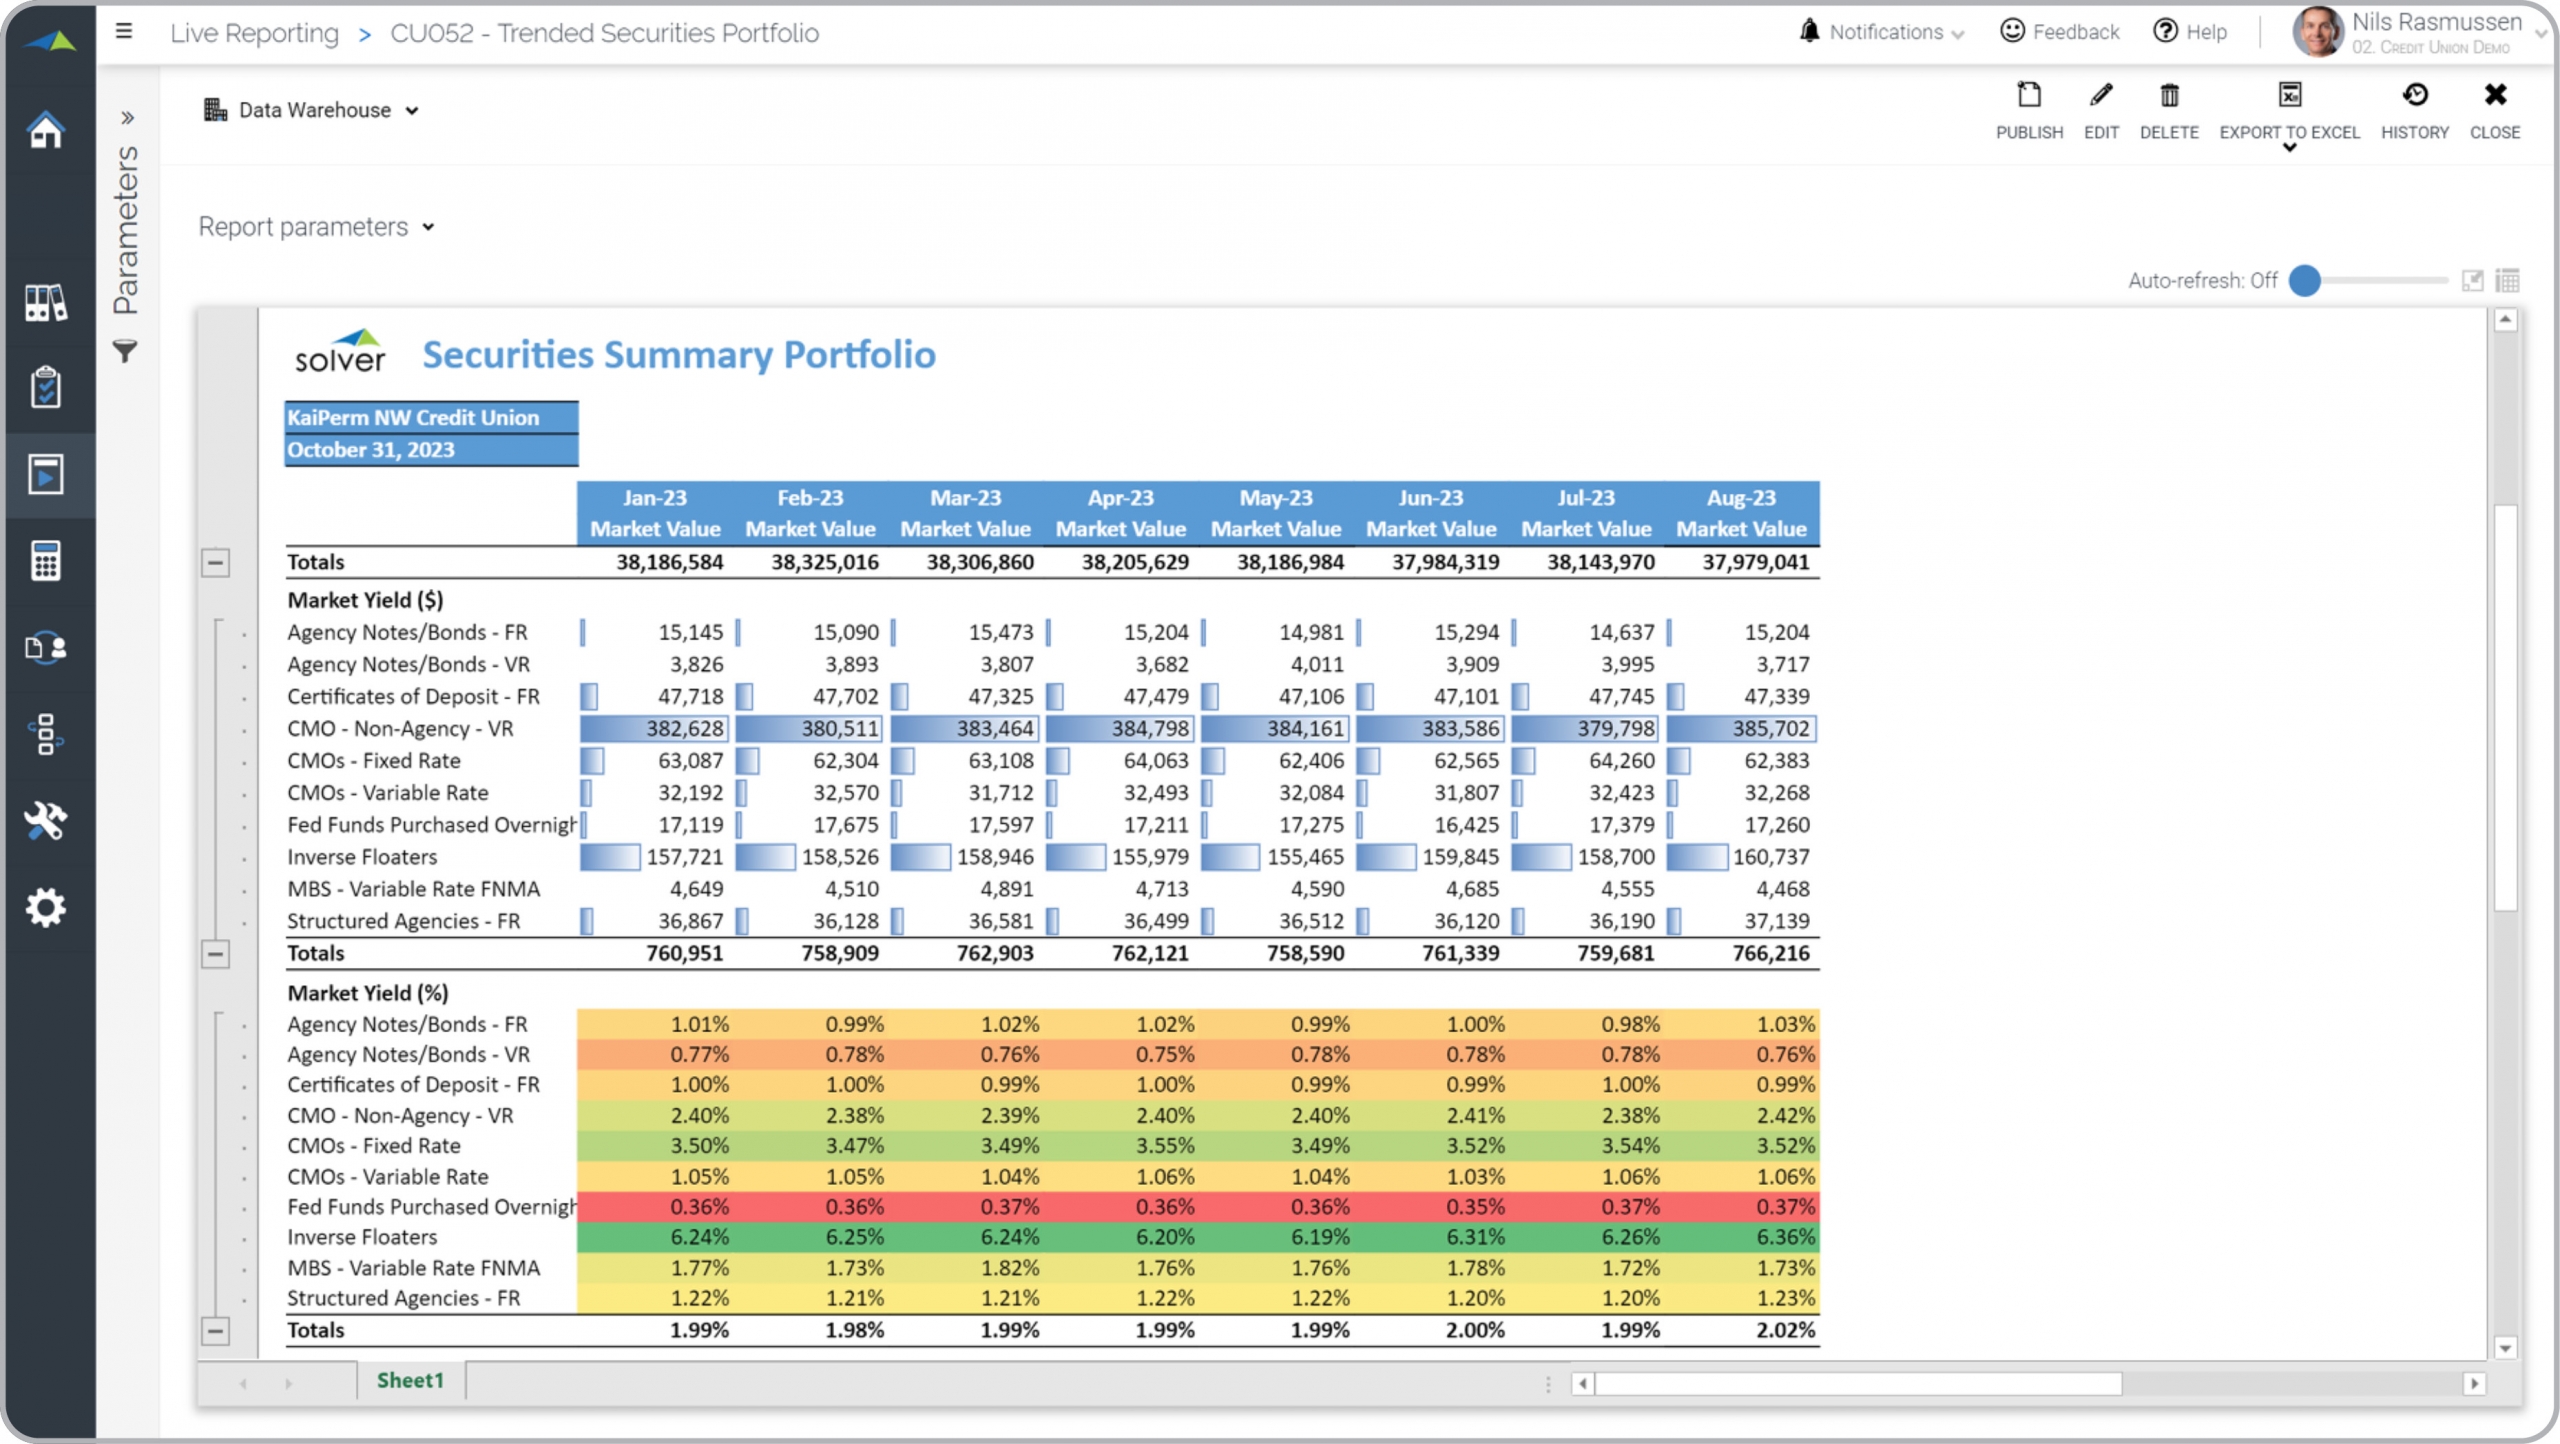 Example of a Trended Securities Summary Portfolio Report for Credit Unions  